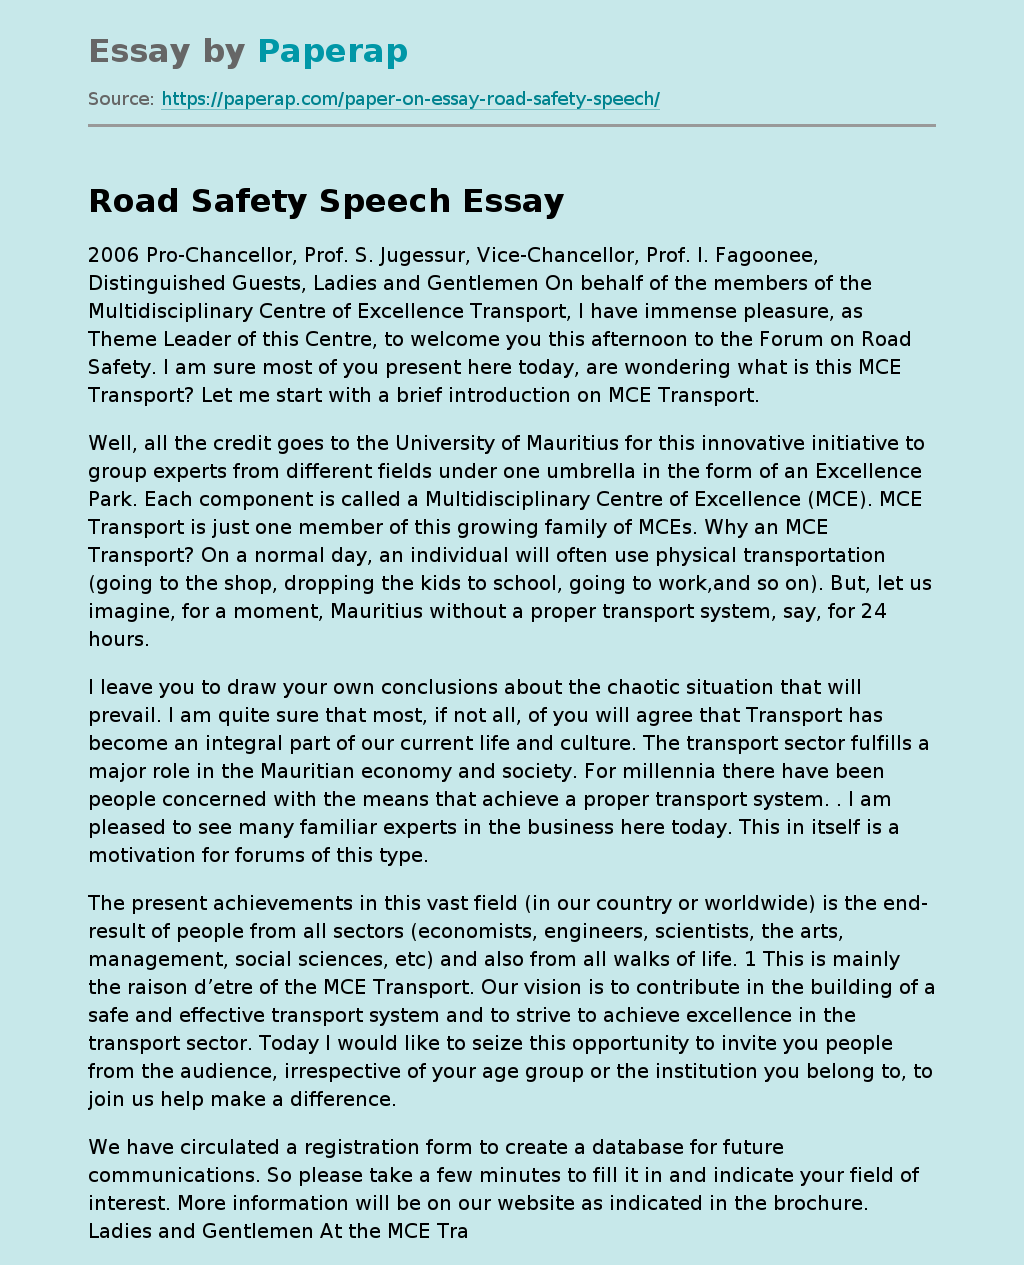 speech on road safety in 200 words